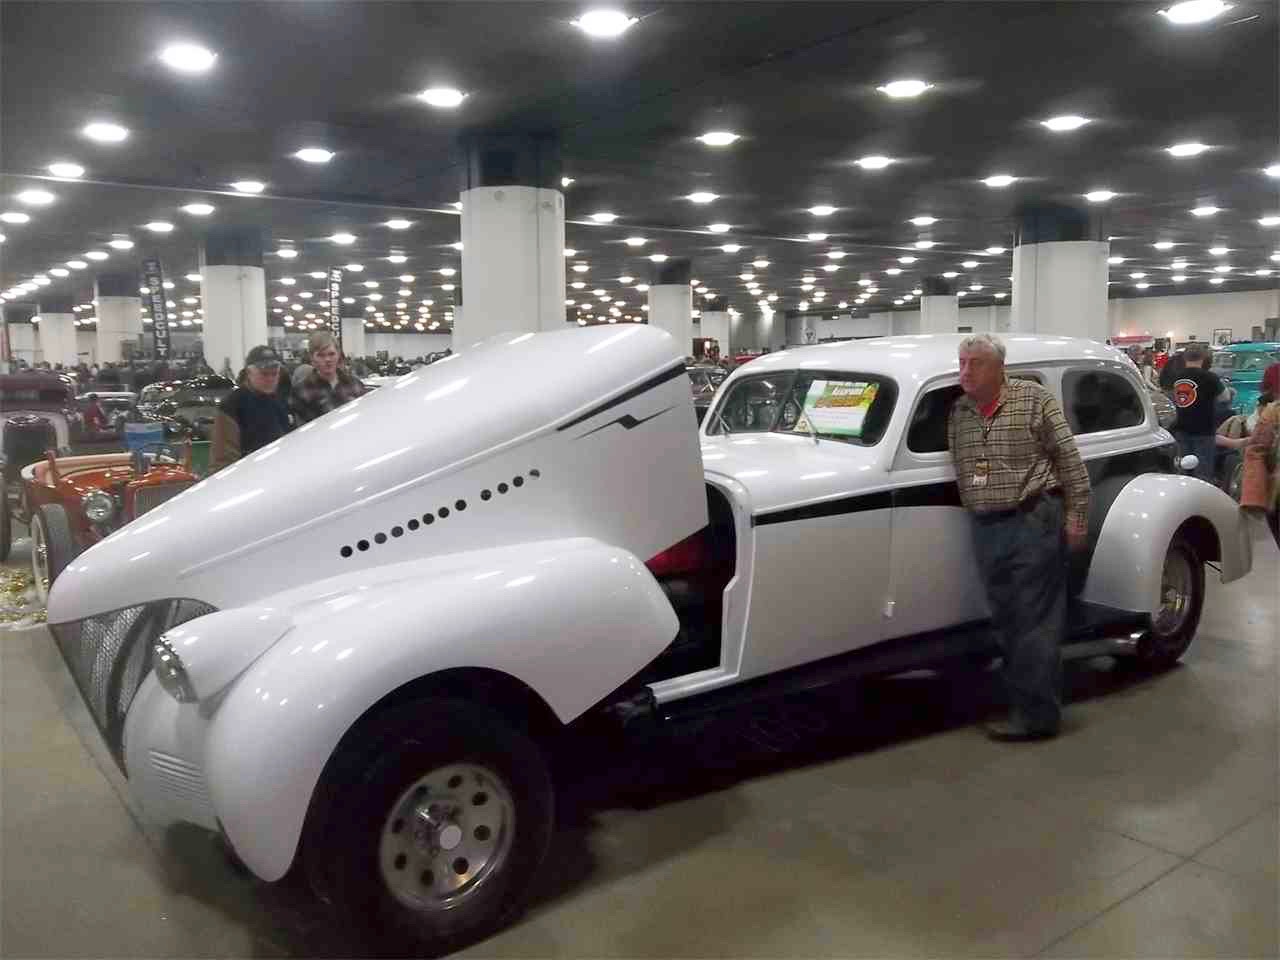 , 1939 Chevrolet powered by WW2 aircraft engine, ClassicCars.com Journal